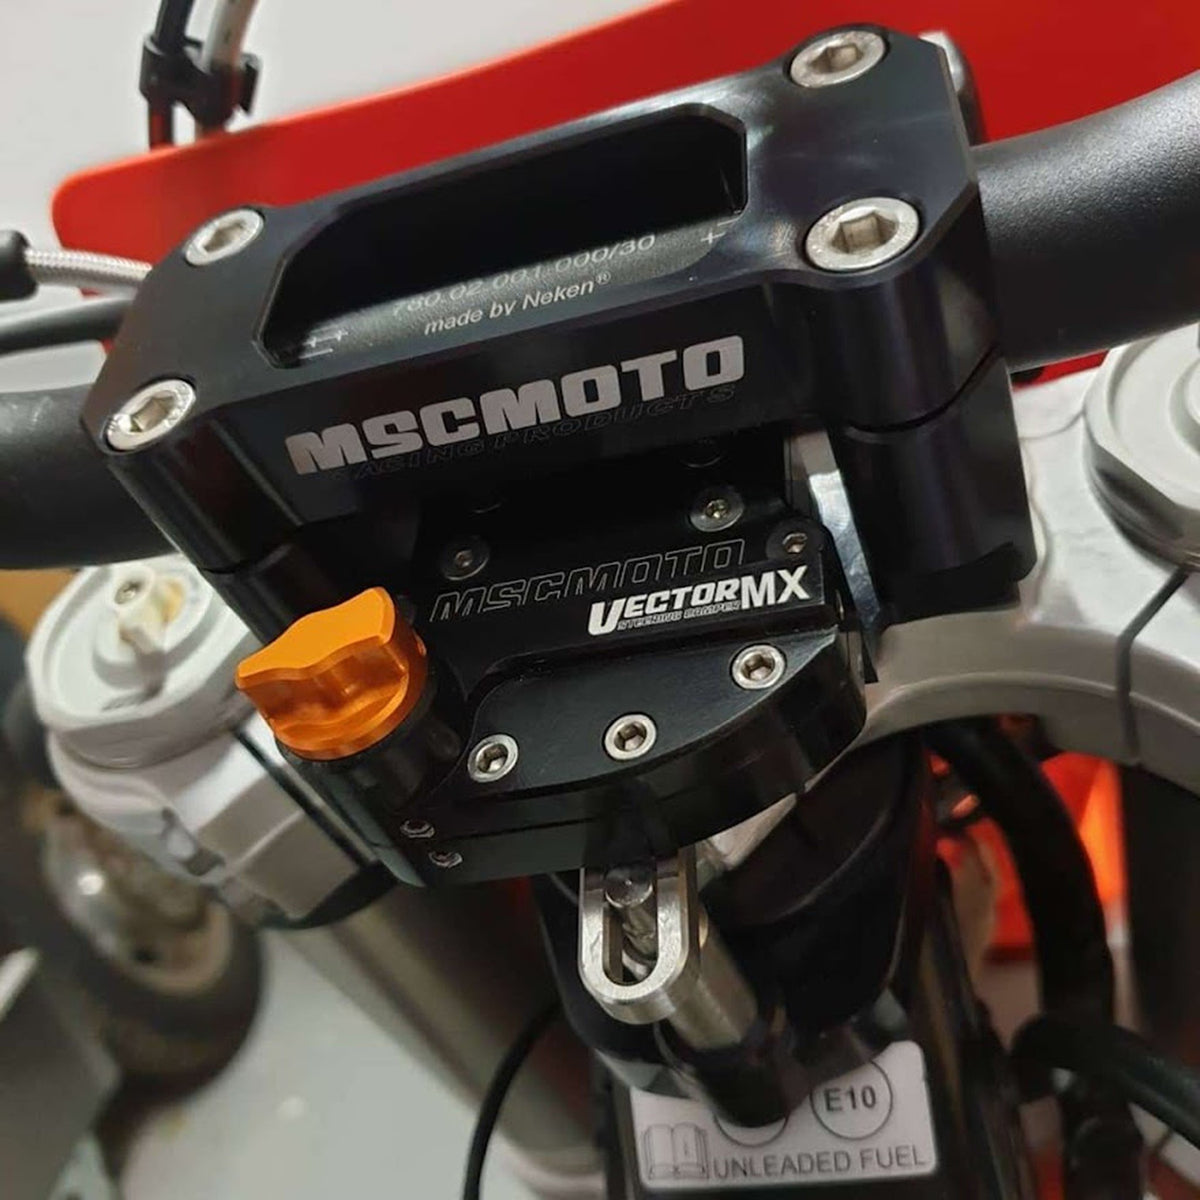 mscmotousa, VectorMX Steering Damper Kit &quot;Down Under&quot; Mount (VEC0002) - KAWASAKI KX 450F, VEC0002, kawasaki, kawasaki-2019-kx-450f-esi2400066, vectormx, , Imported and distributed in North &amp; South America by Lindeco Genuine Powersports.